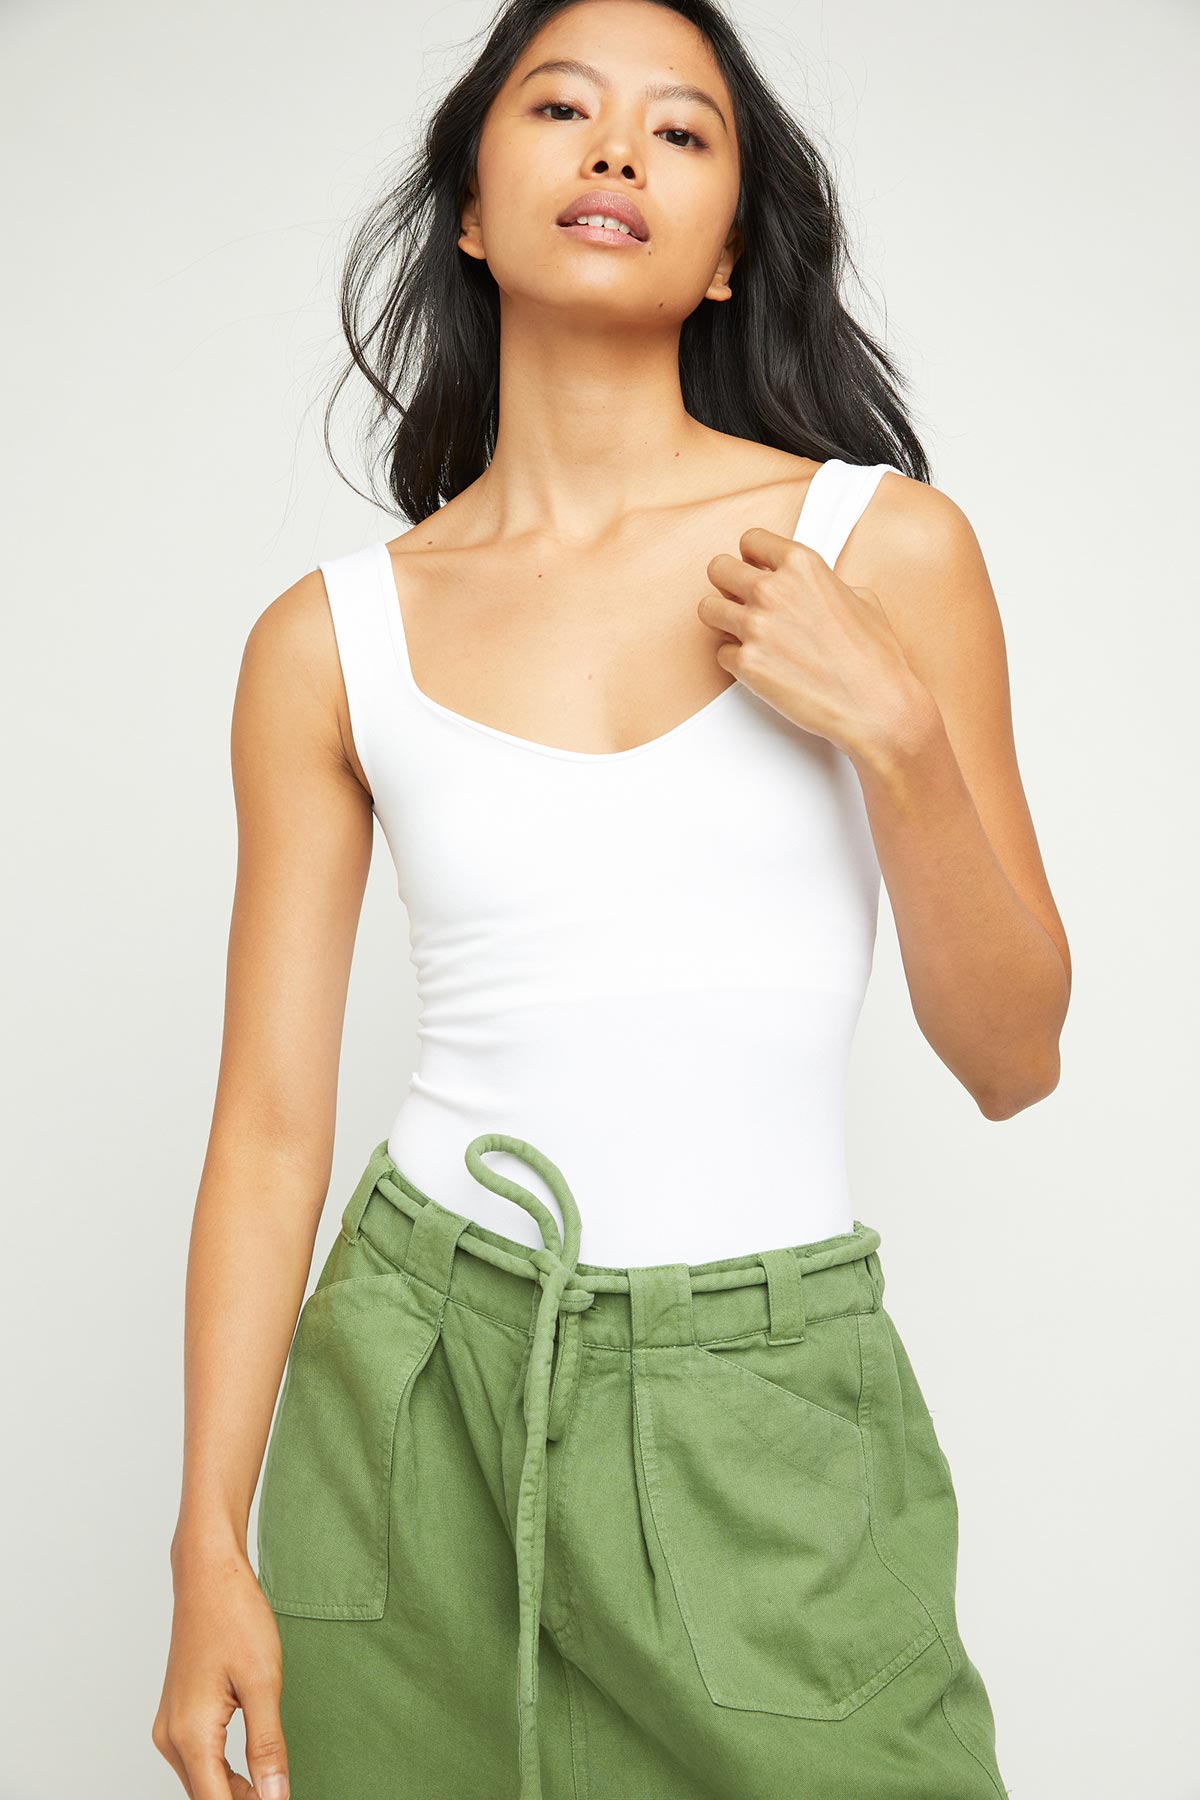 Free People - Clean Lines Bodysuit - White